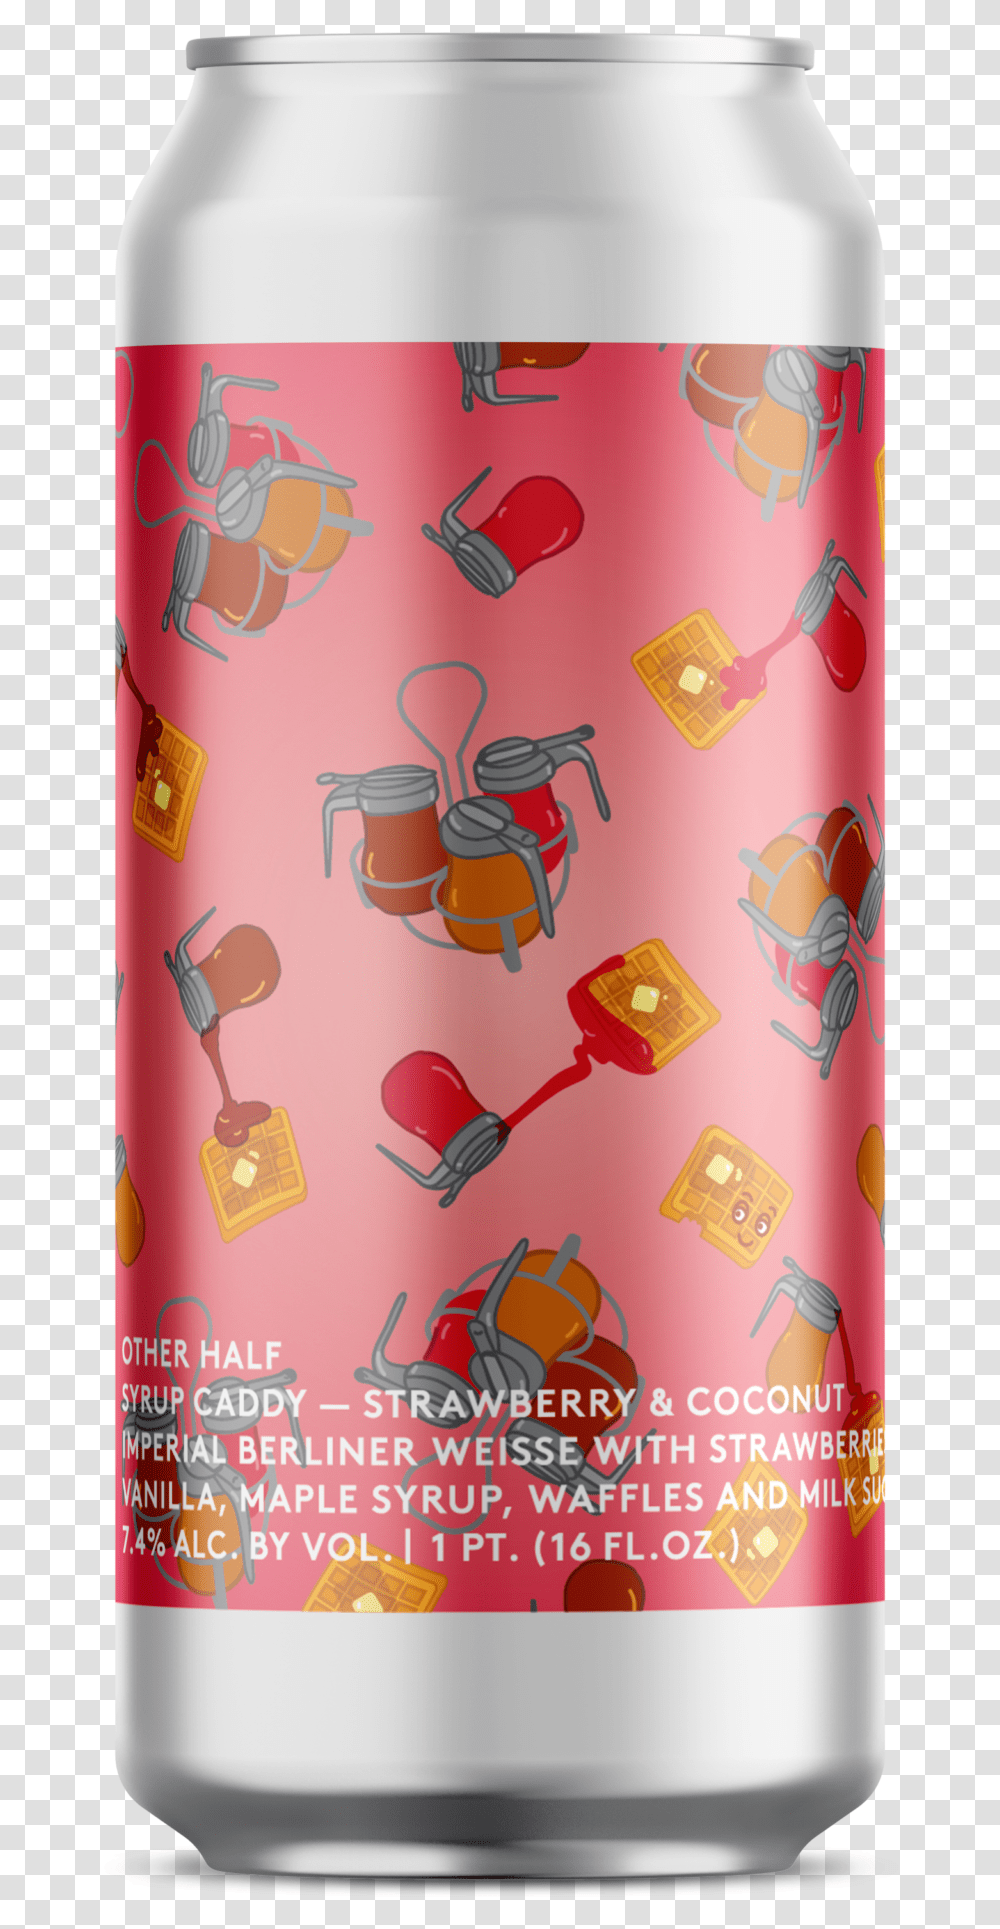 Other Half Syrup Caddy, Bottle, Tin, Paper Transparent Png